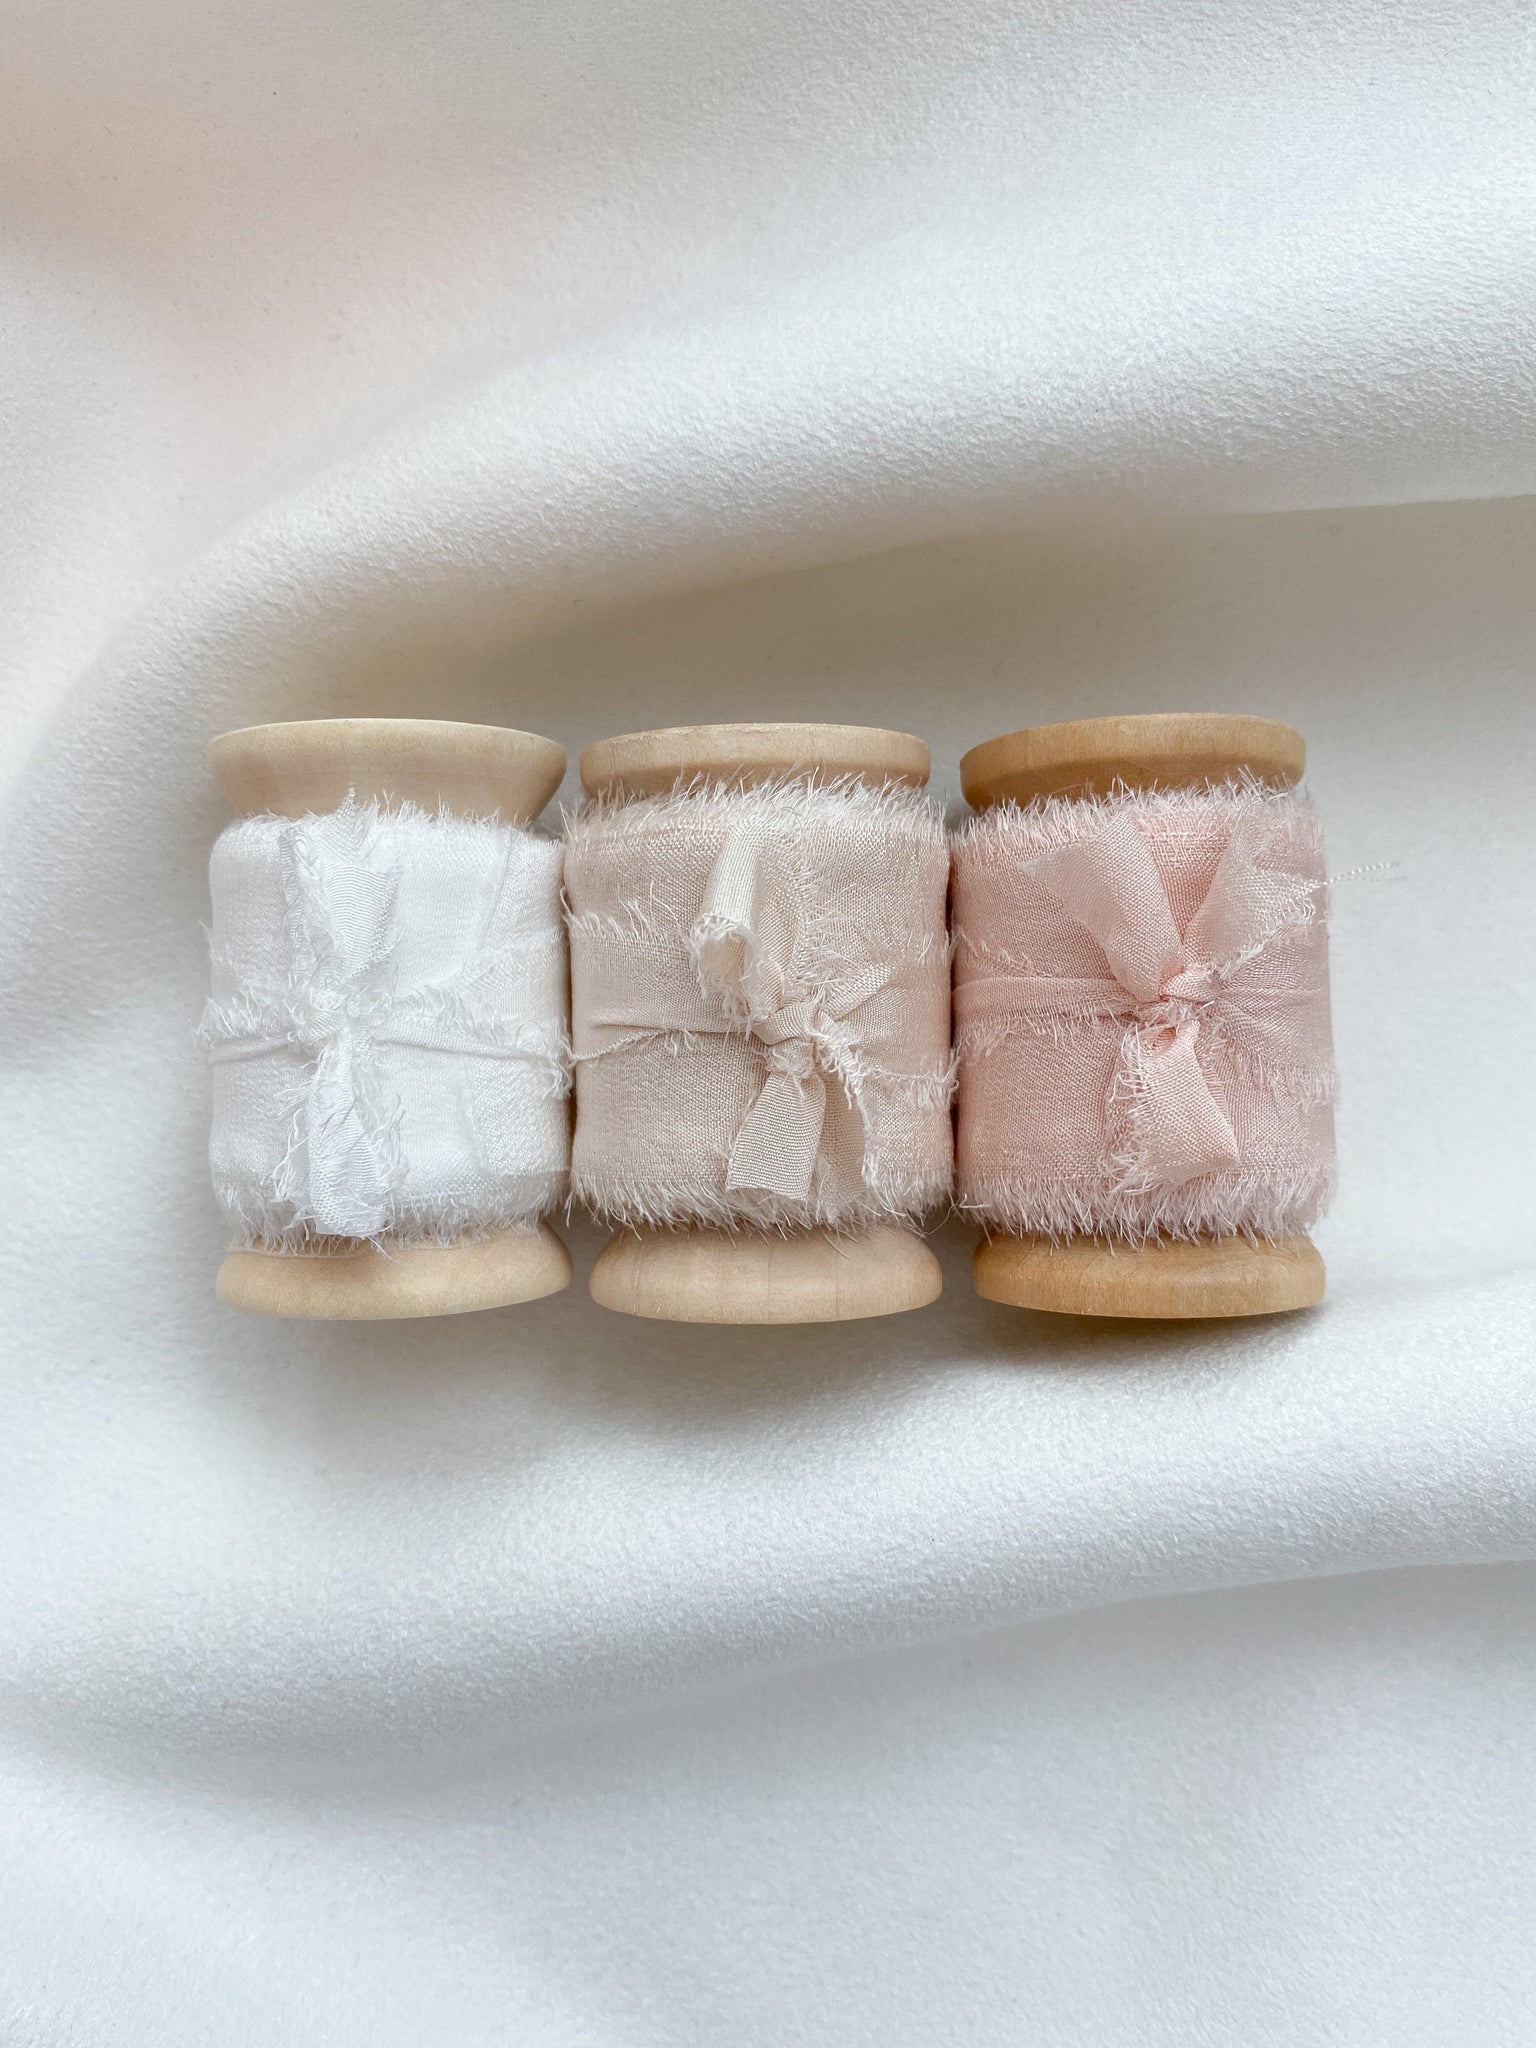 Raw edge 1 inch silk ribbon set of 3 in color Soft White, Cream White, and Nude